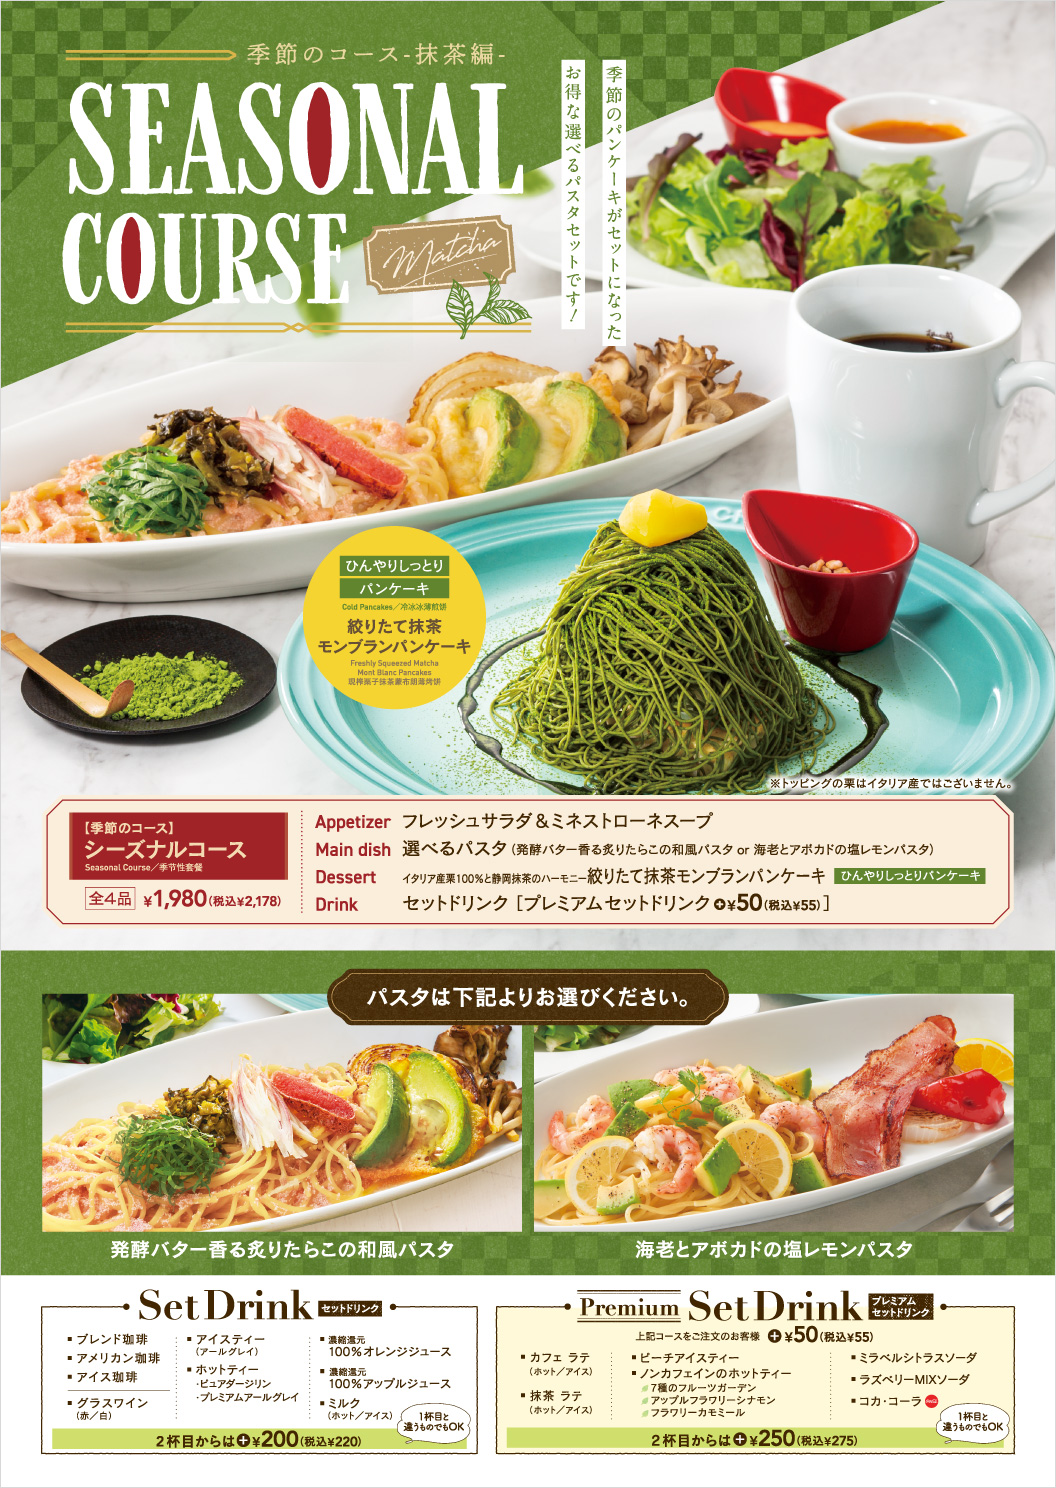 Seasonal course Seasonal Course, fresh salad & minestrone soup, choice of pasta Japanese Pasta with Seared Cod Roe in Fermented Butter lemon pasta with shrimp and avocado, freshly squeezed Matcha Mont Blanc Pancakes, set drink